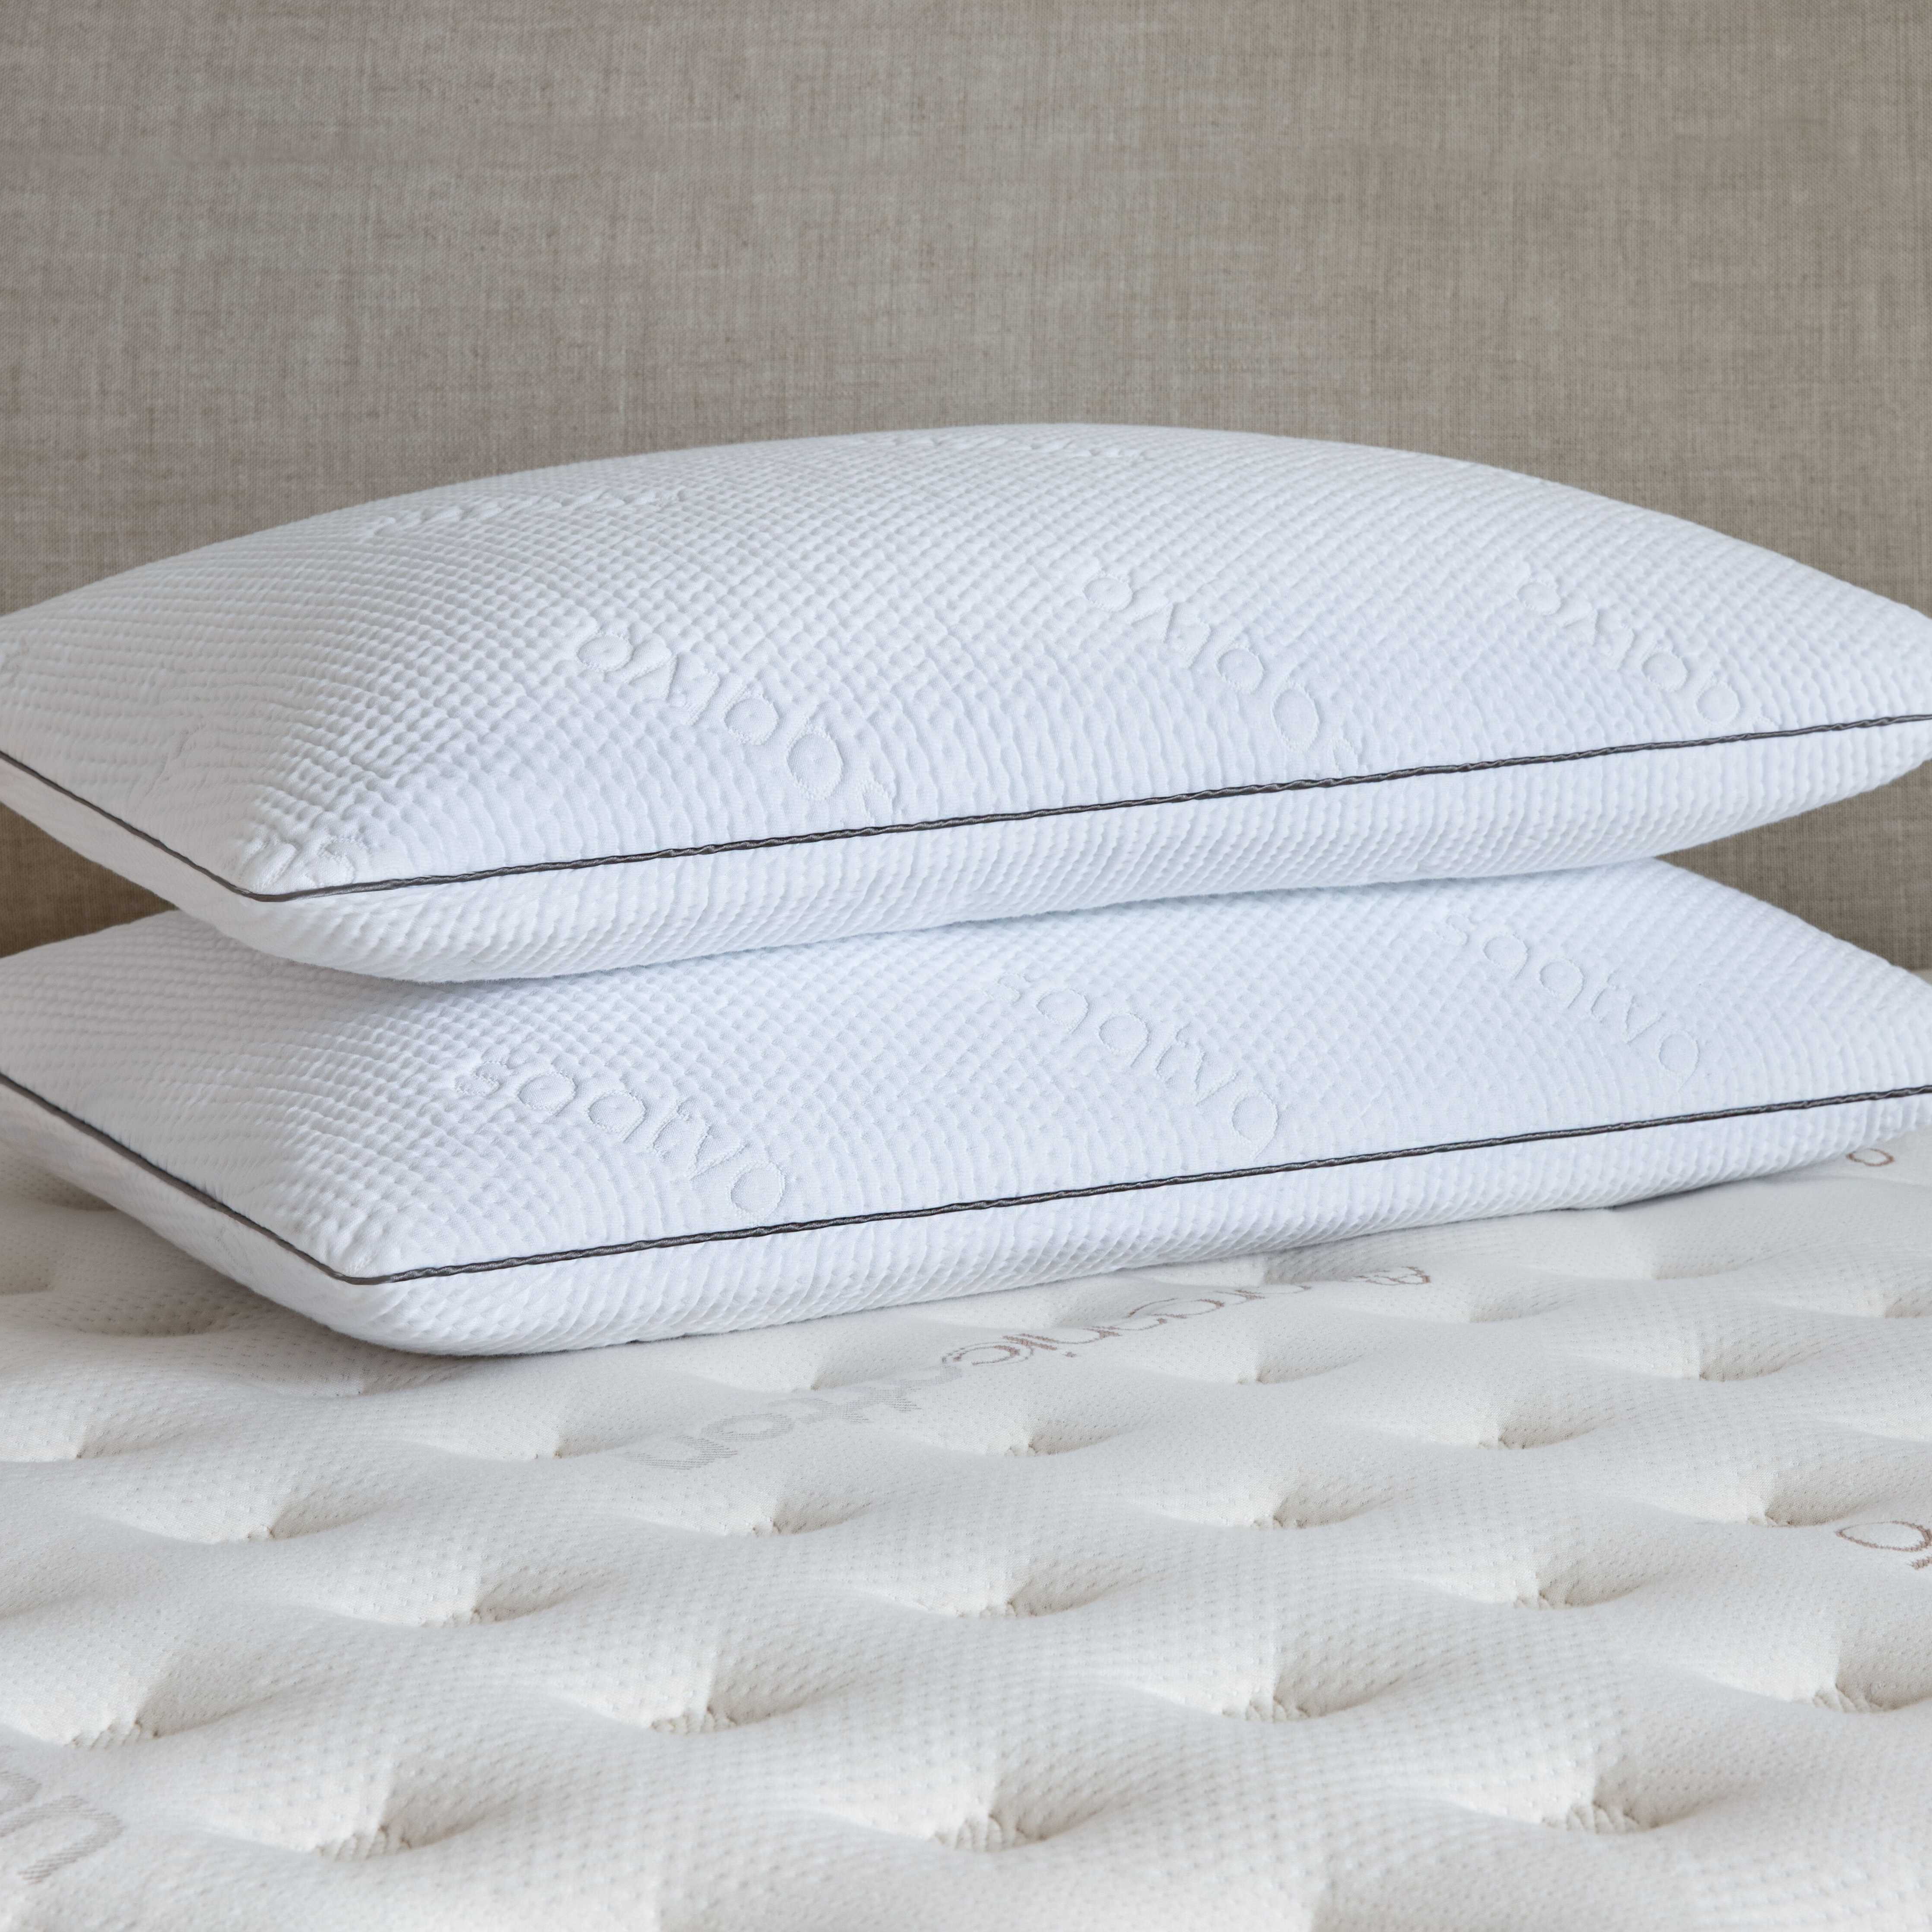 Best Pillows for Side Sleepers for a Better Night’s Sleep | TIME Stamped